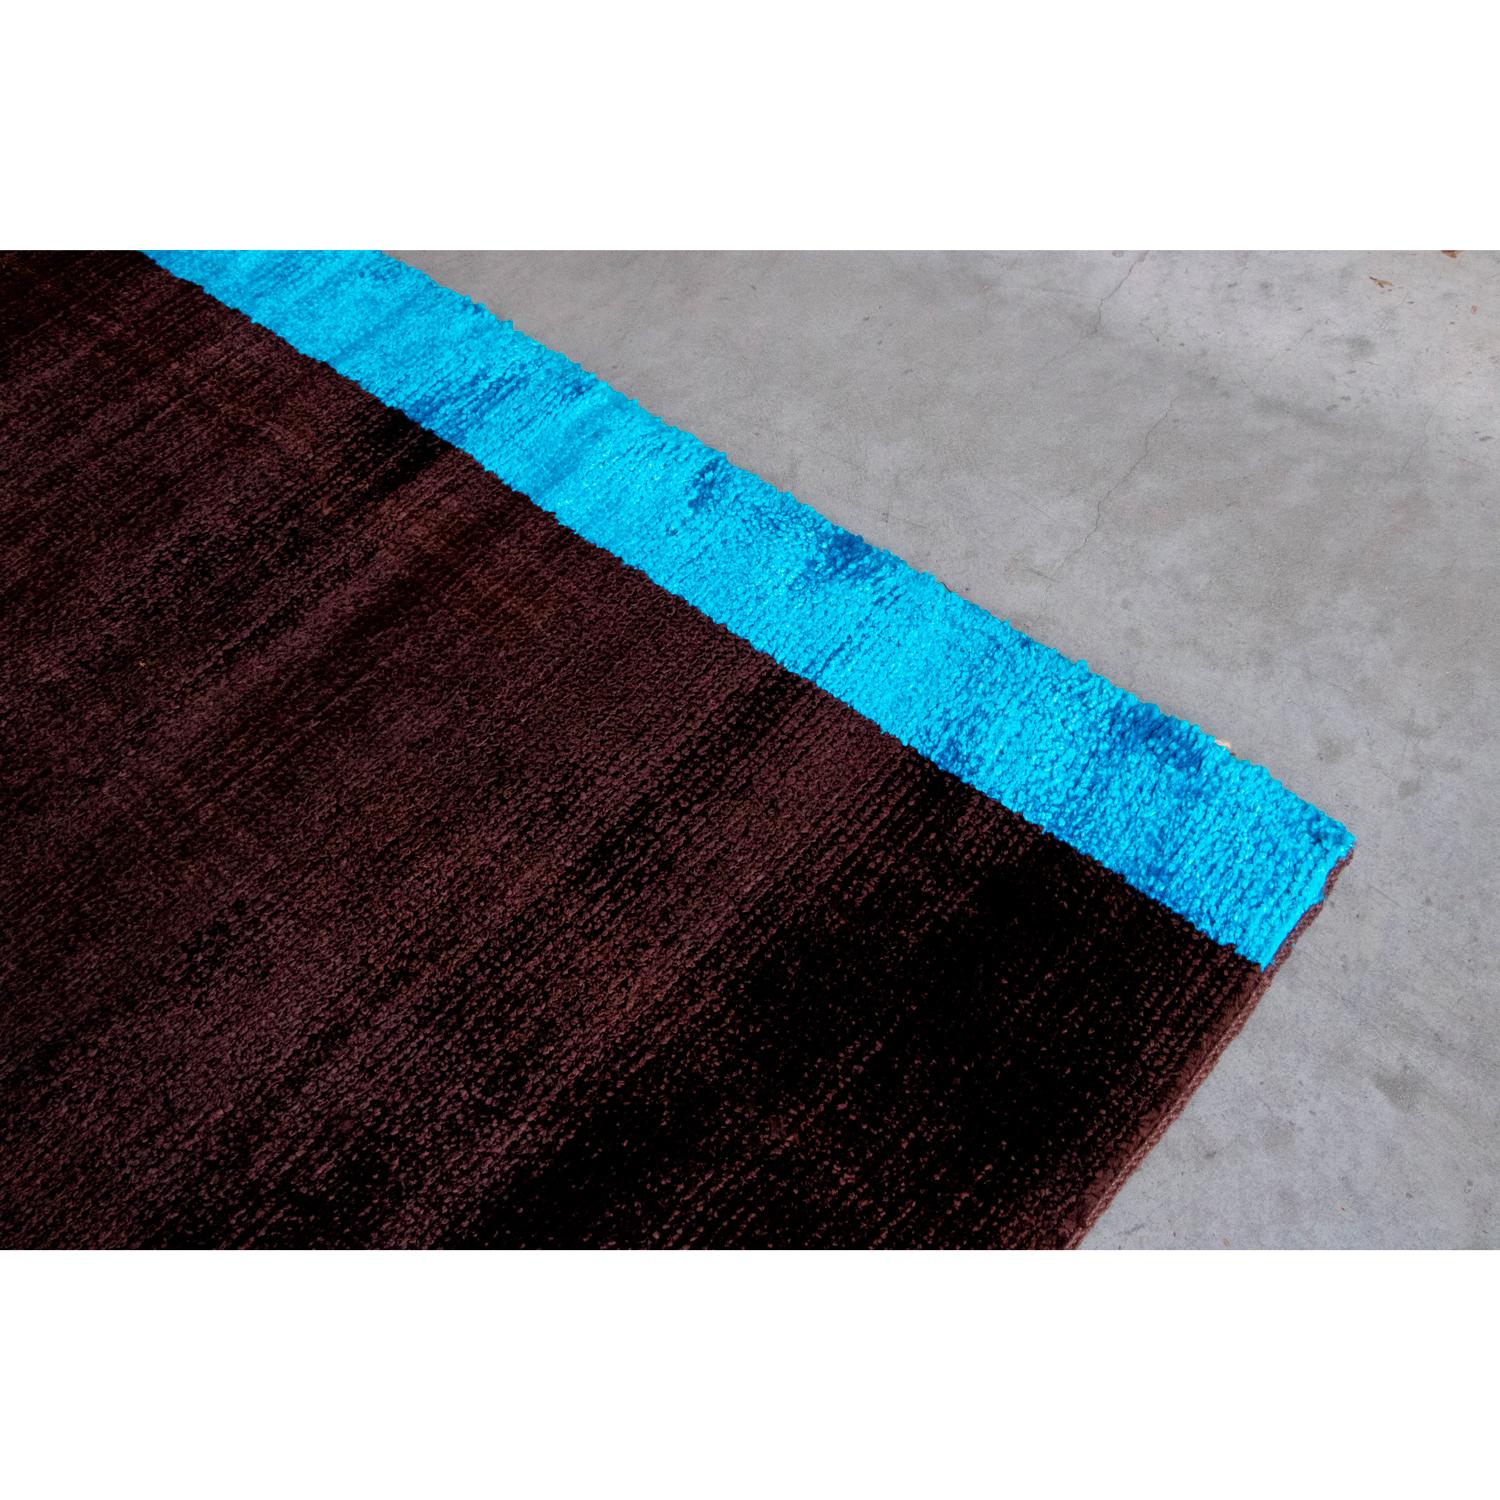 21st Cent Shiny Sky Blue Brown Runner Rug by Deanna Comellini in Stock 70x240 cm In New Condition For Sale In Bologna, IT